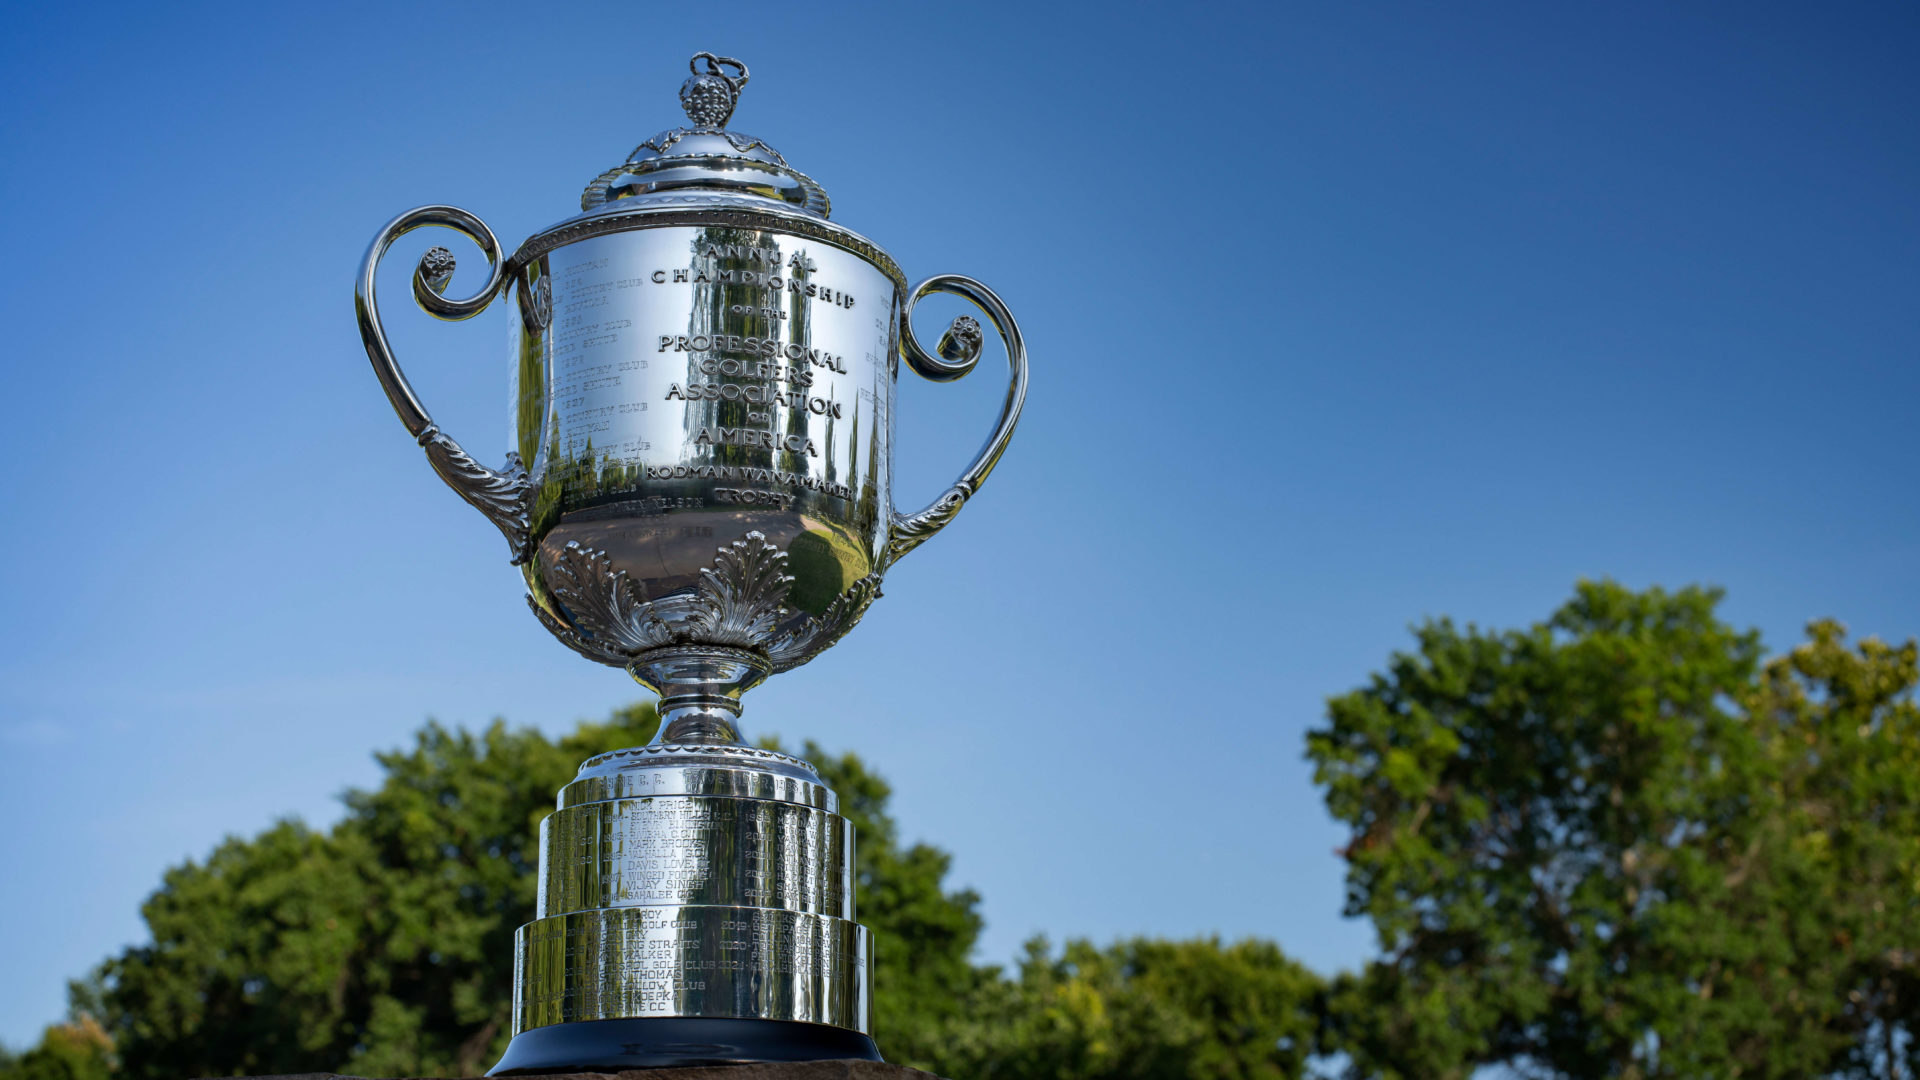 TULSA, OKLAHOMA - AUGUST 10: A view of the Wanamaker trophy at Southern Hills Country Club on August 10, 2021 in Tulsa, Oklahoma. (Photo by Gary Kellner/PGA of America)